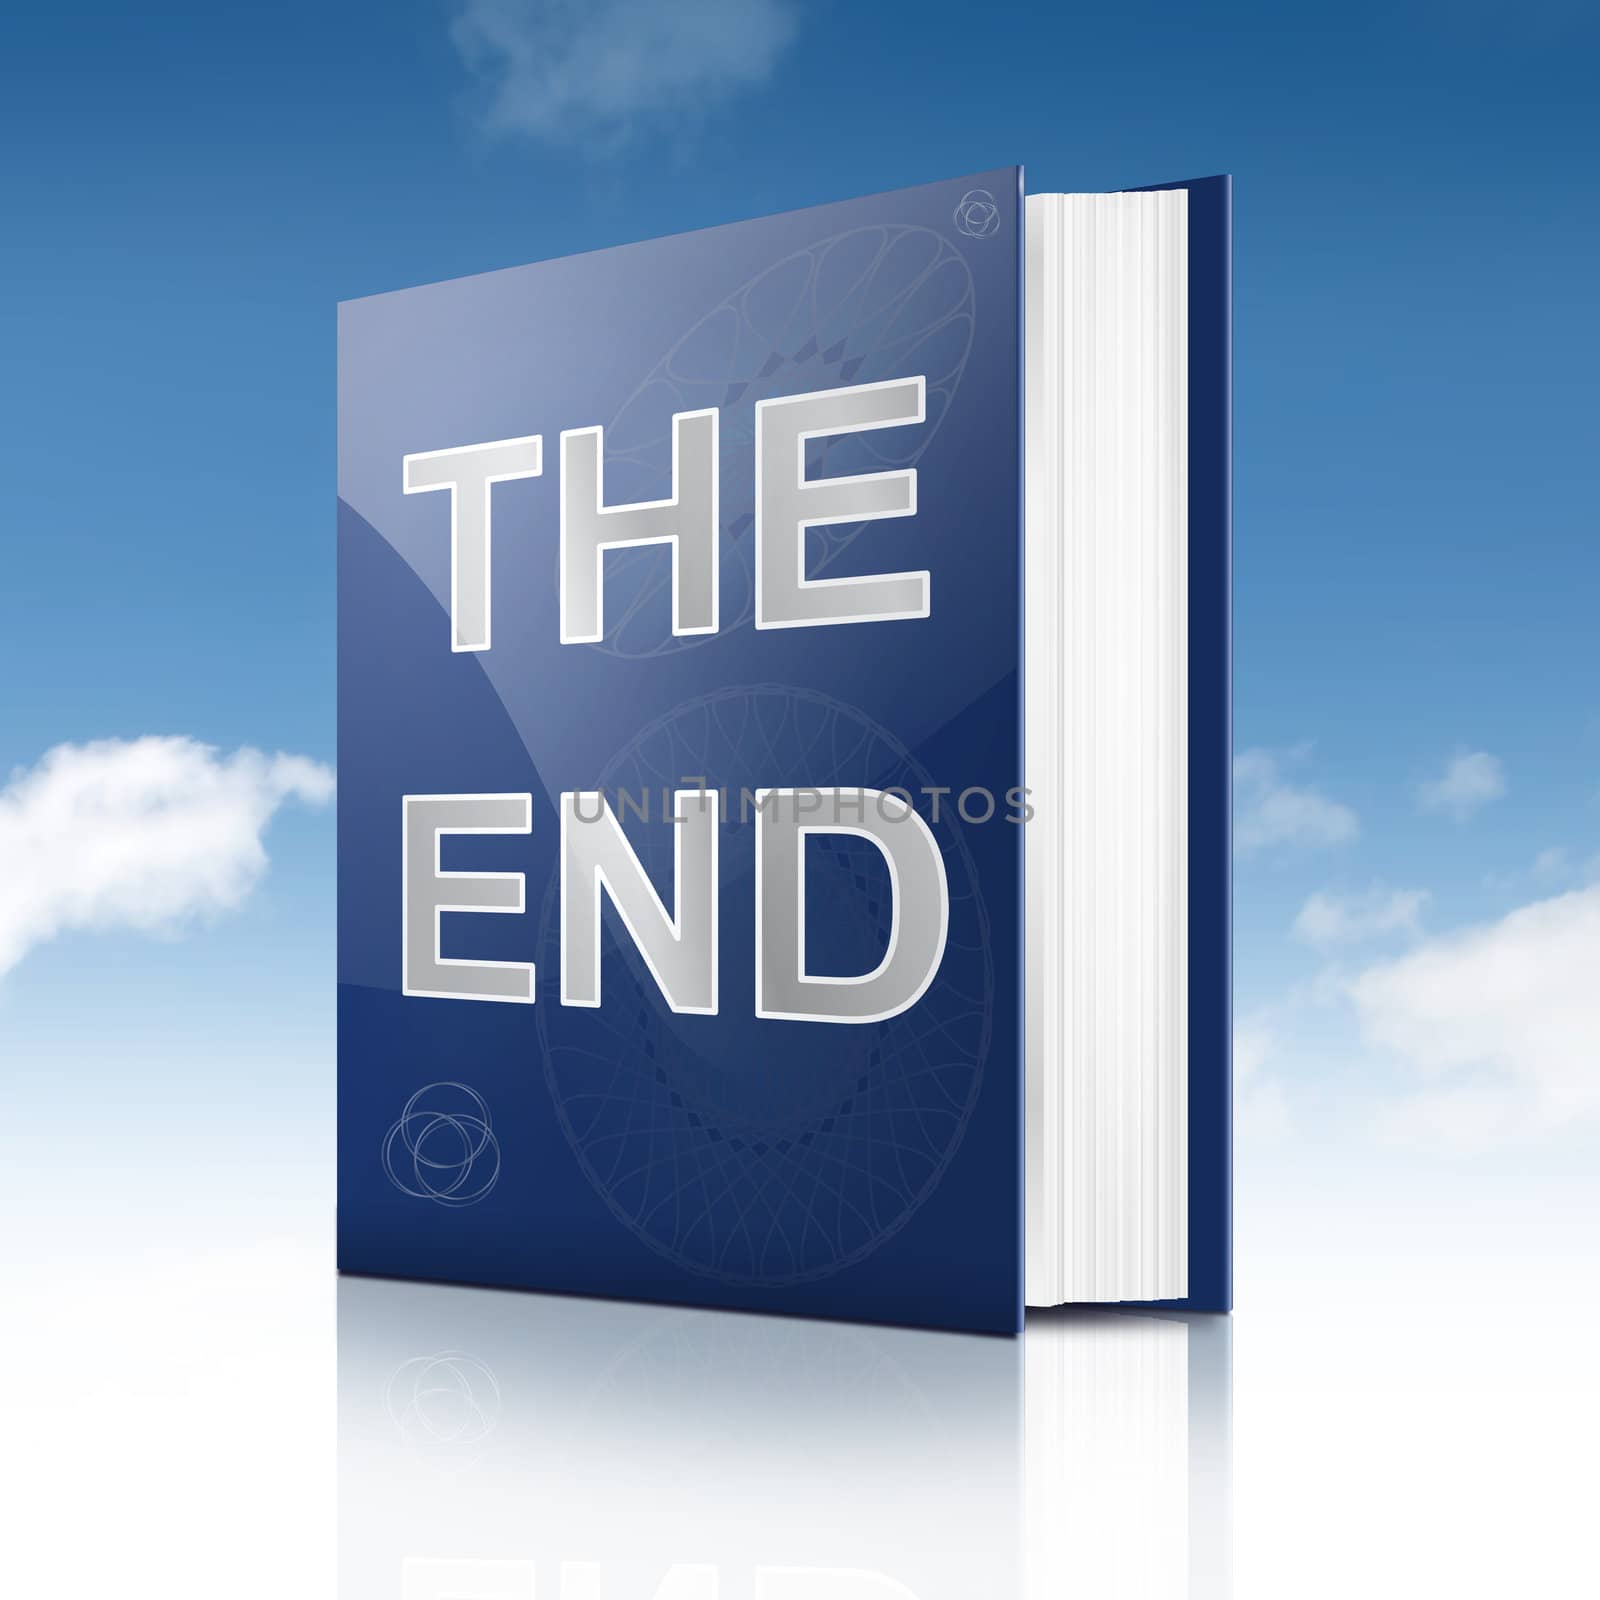 The end. by 72soul